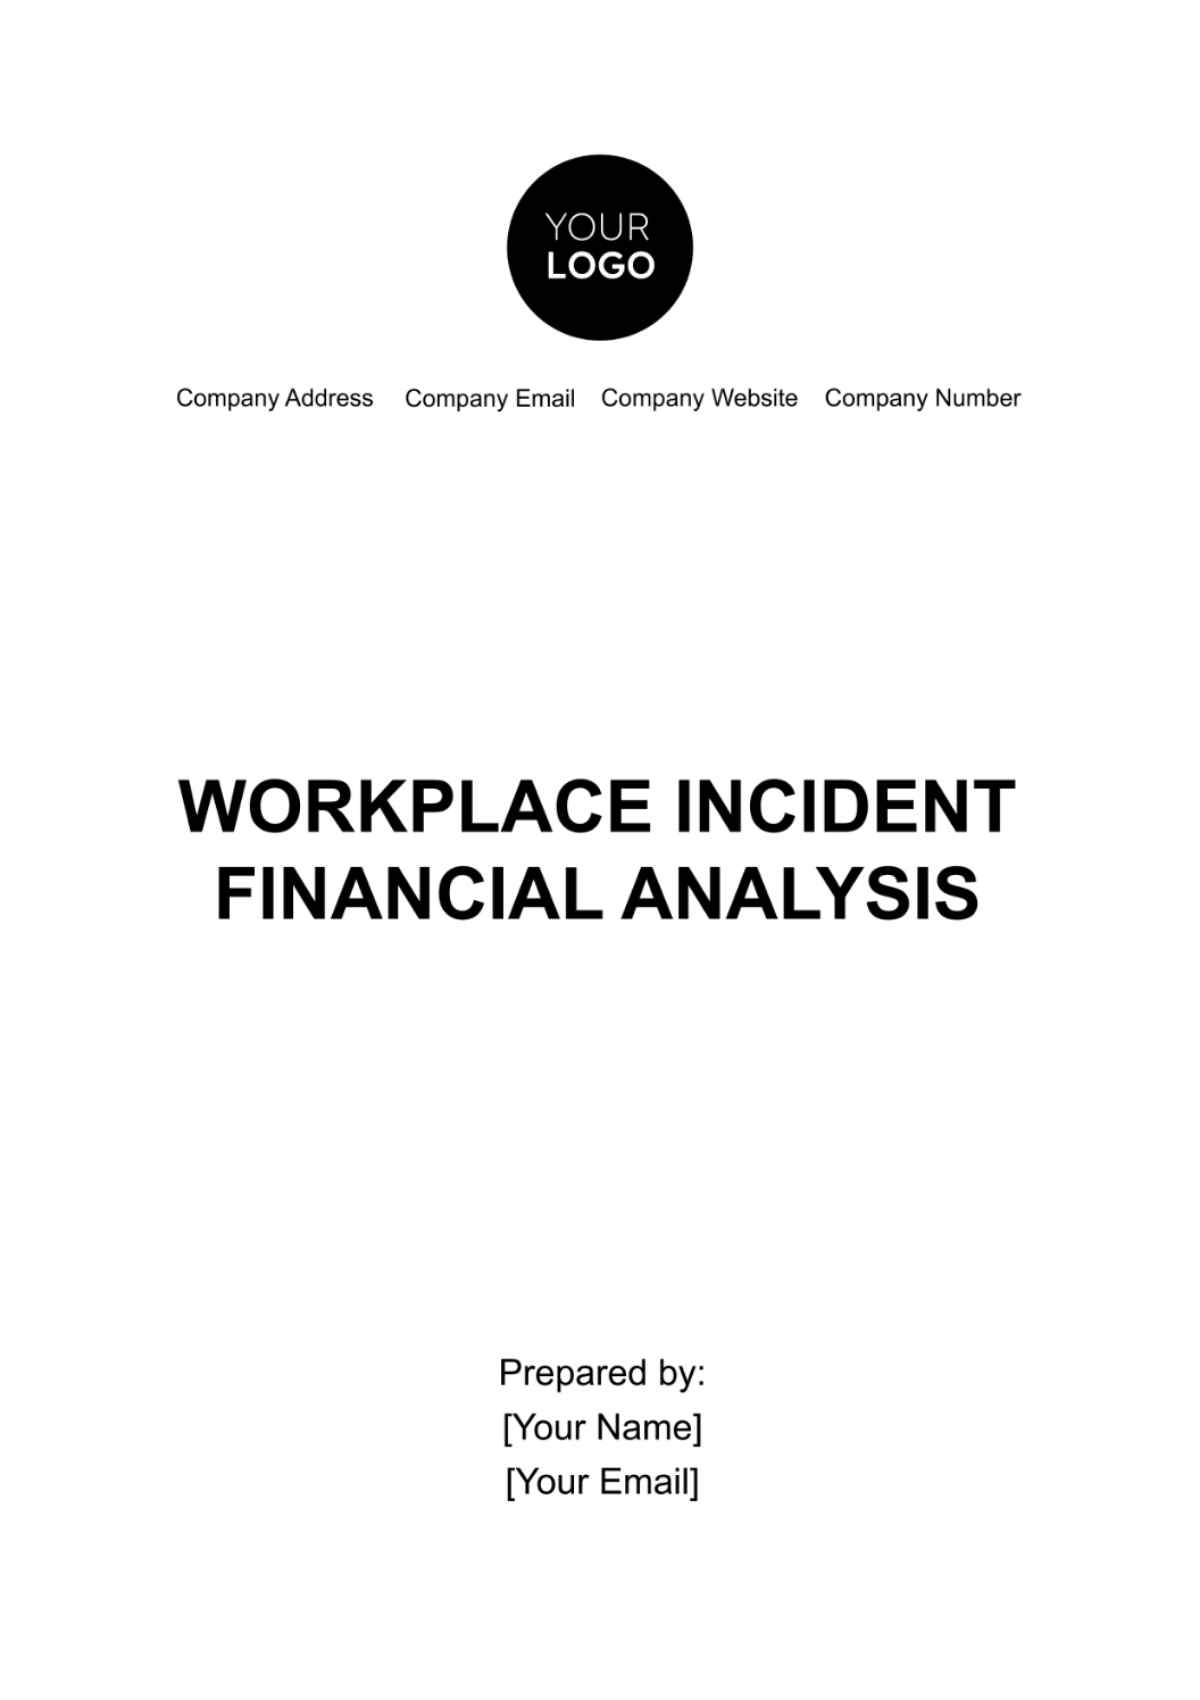 Workplace Incident Financial Analysis Template